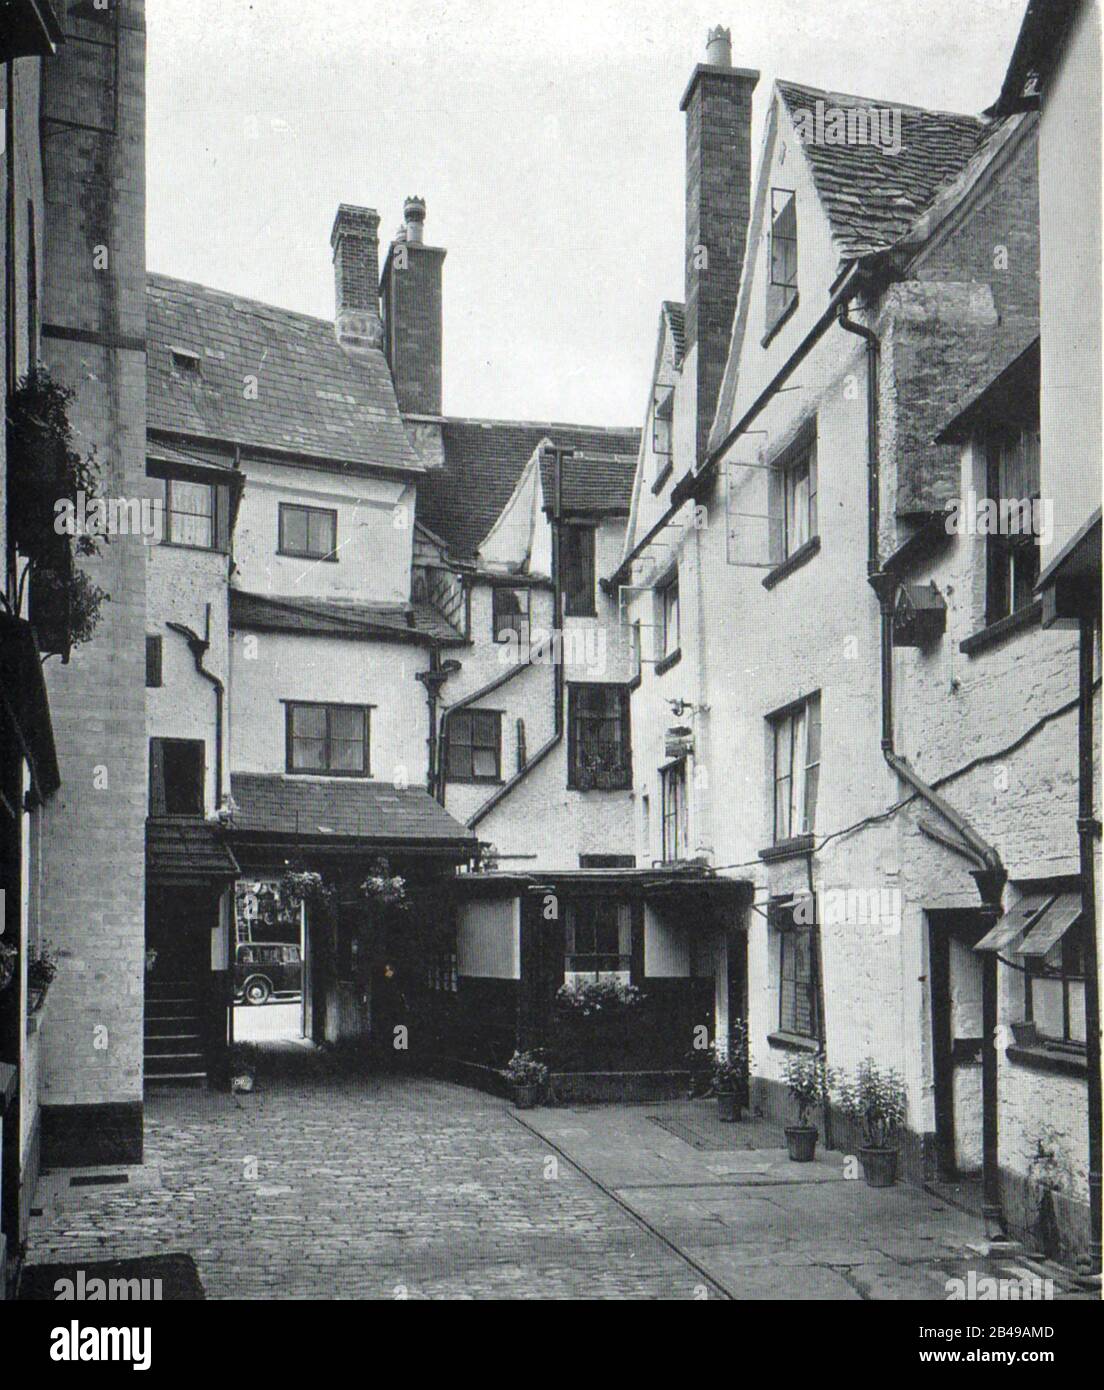 British hotels, pubs, inns and taverns. A circa 1930's photograph of the coach yard of the Fleece Inn at Cirencester Stock Photo